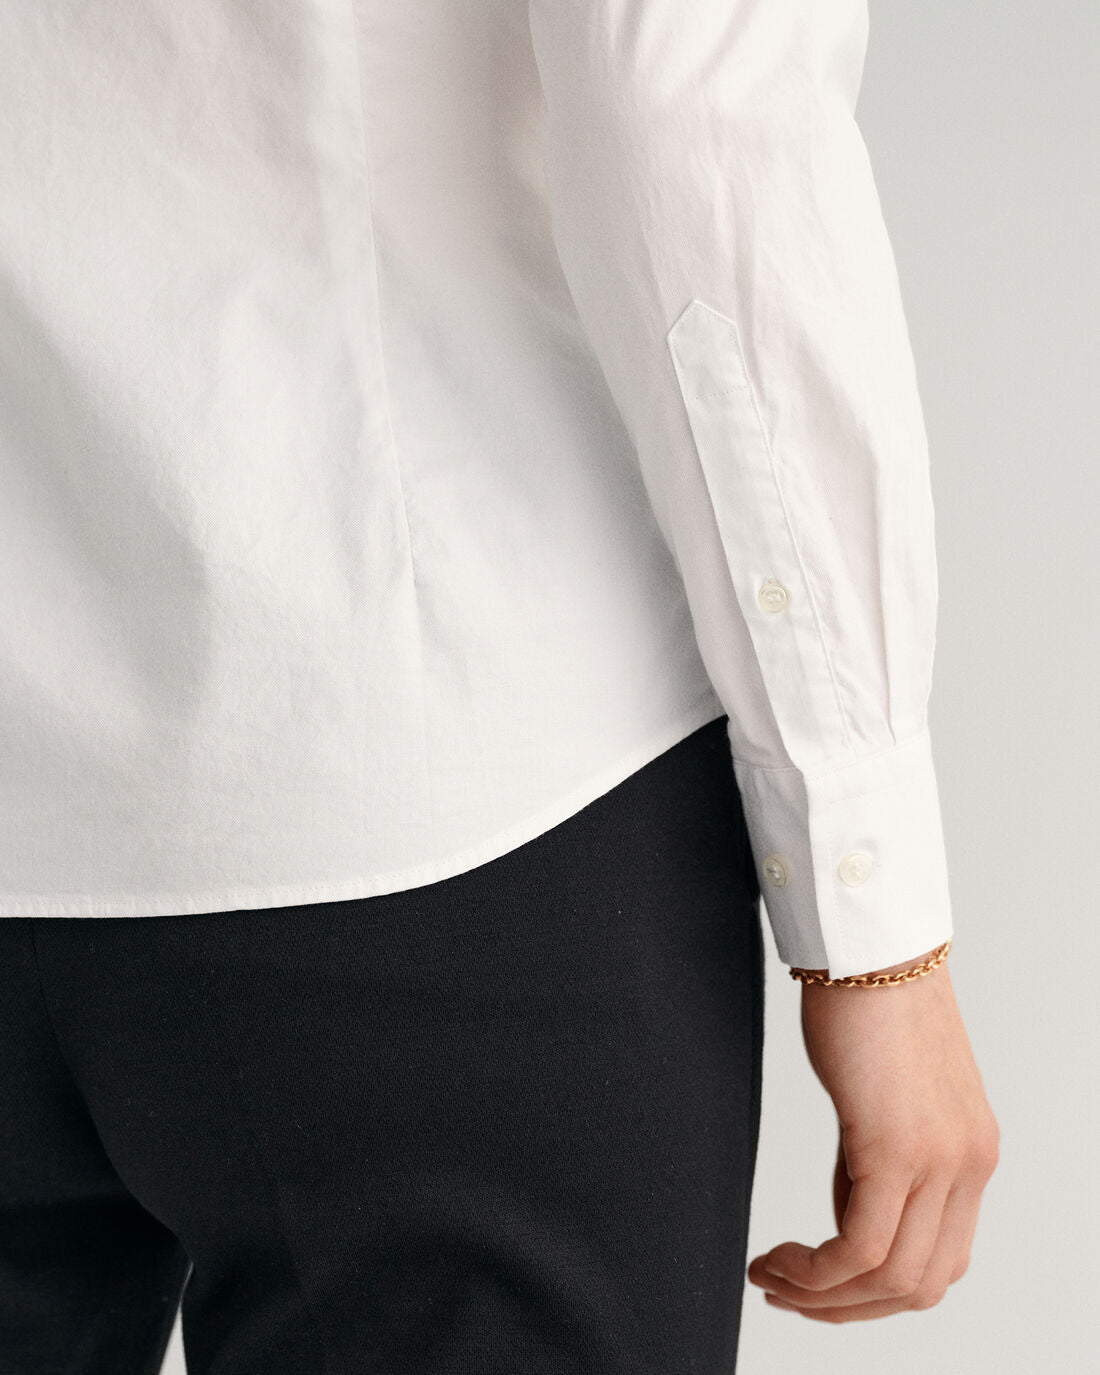 Stretch Oxford Solid - White